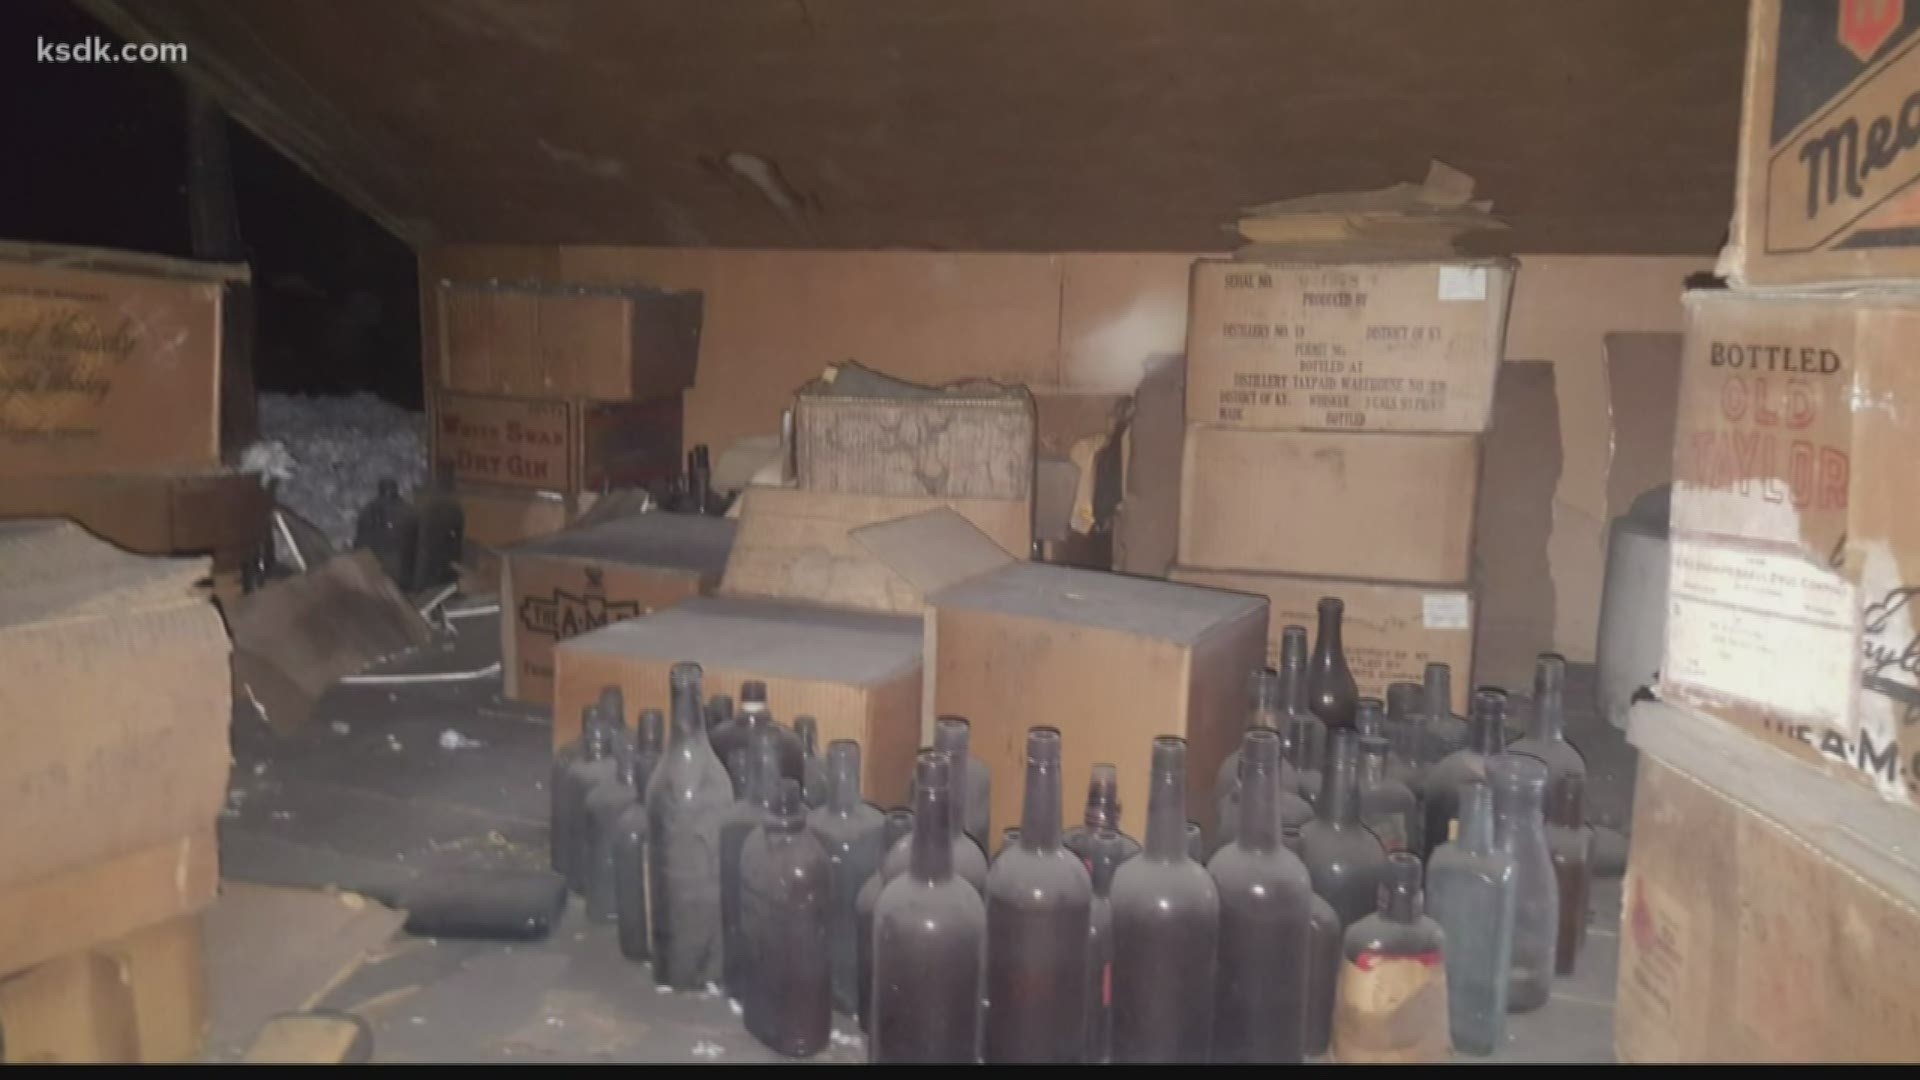 Hidden in an East St. Louis home, hundreds of liquor bottles were found from when the home was built back in the 1920s.